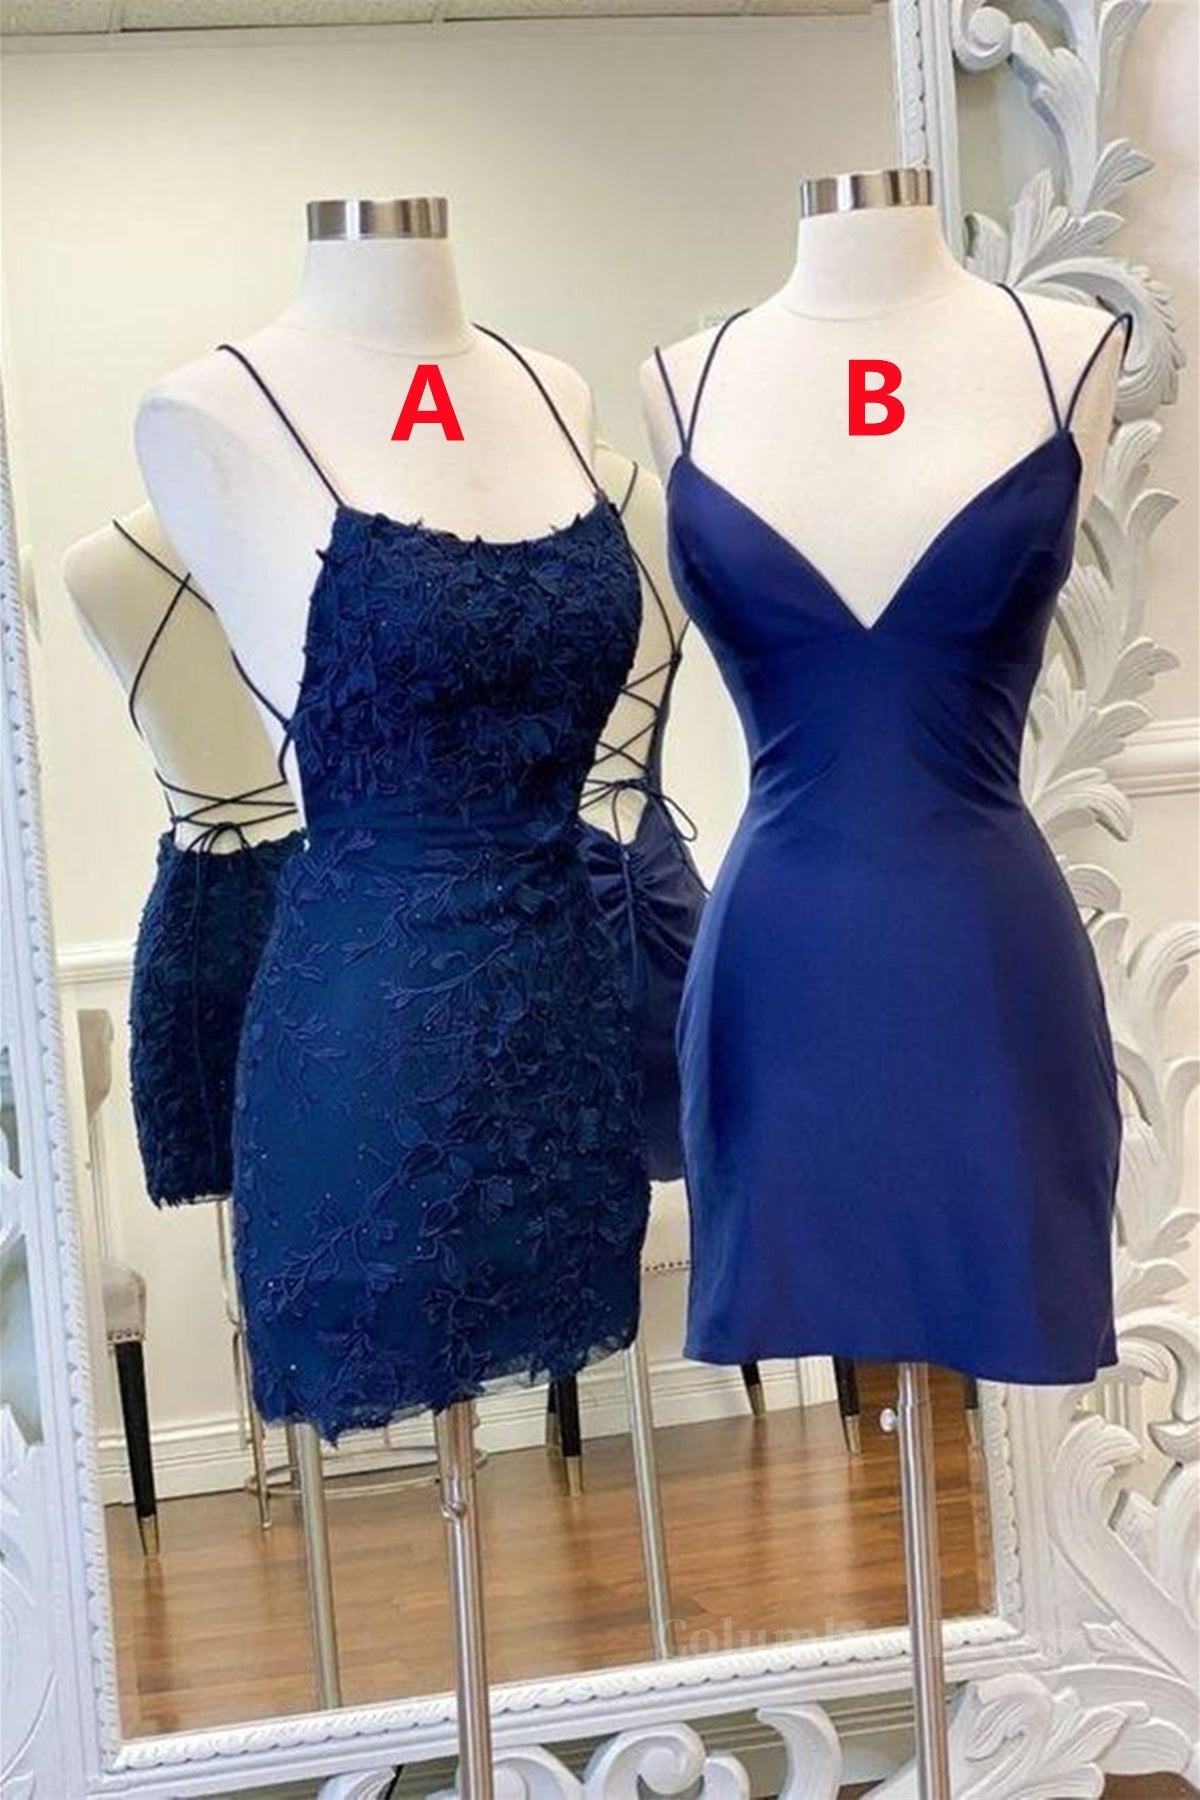 Mermaid Backless Blue Lace Corset Prom Dress, V Neck Blue Corset Homecoming Dress, Blue Lace Corset Formal Evening Dress outfit, Bridesmaid Dress Vintage